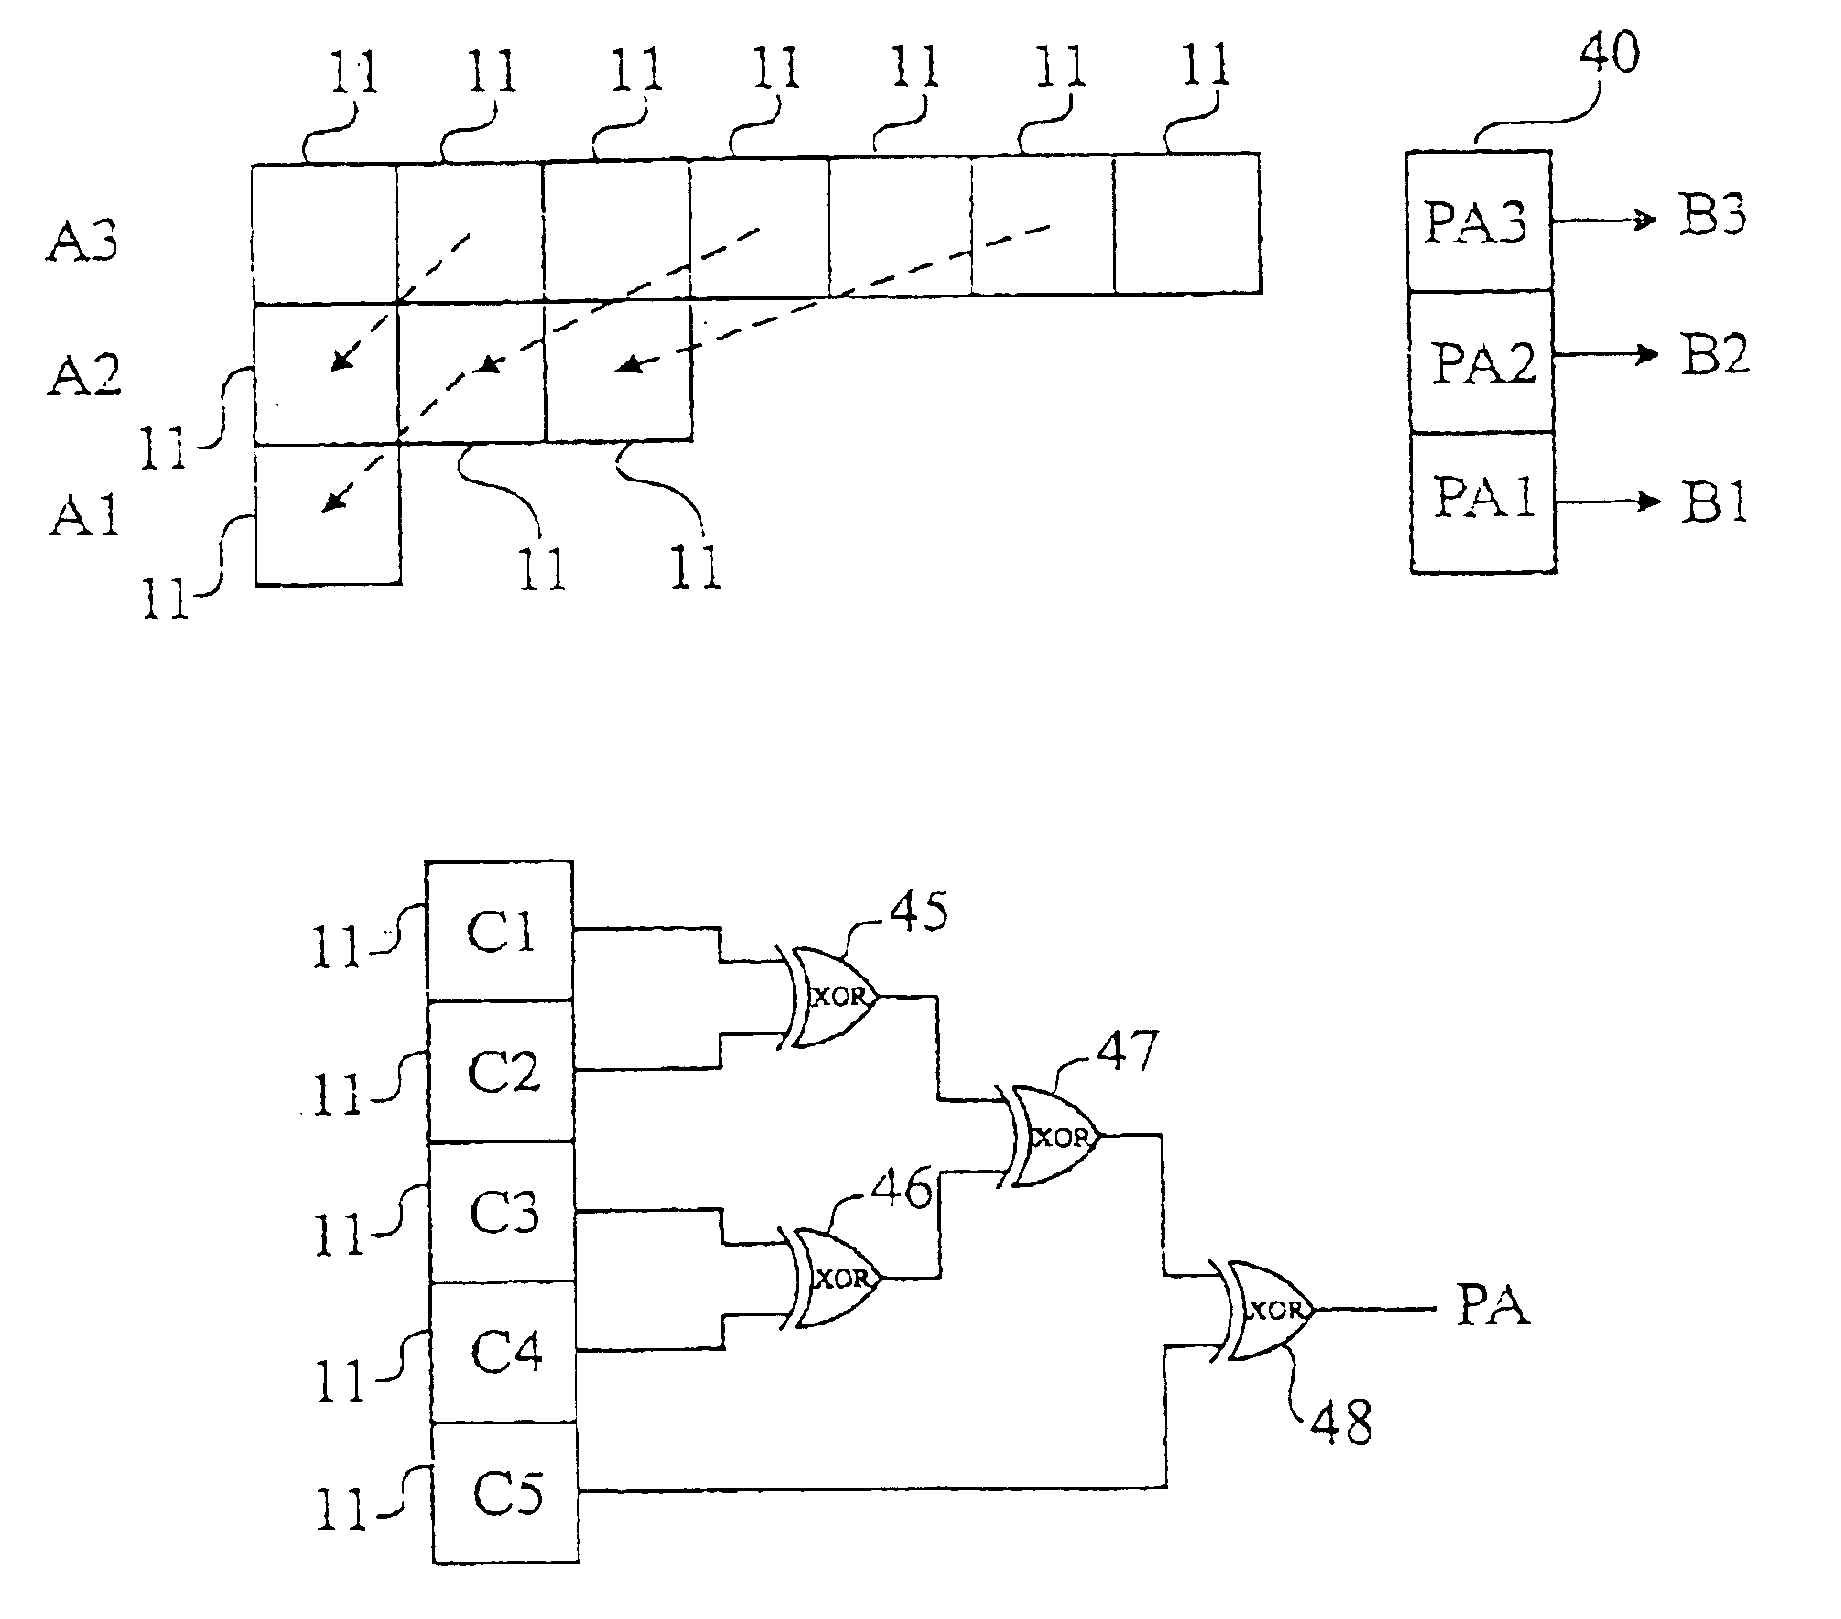 Monotonic up-counter in an integrated circuit